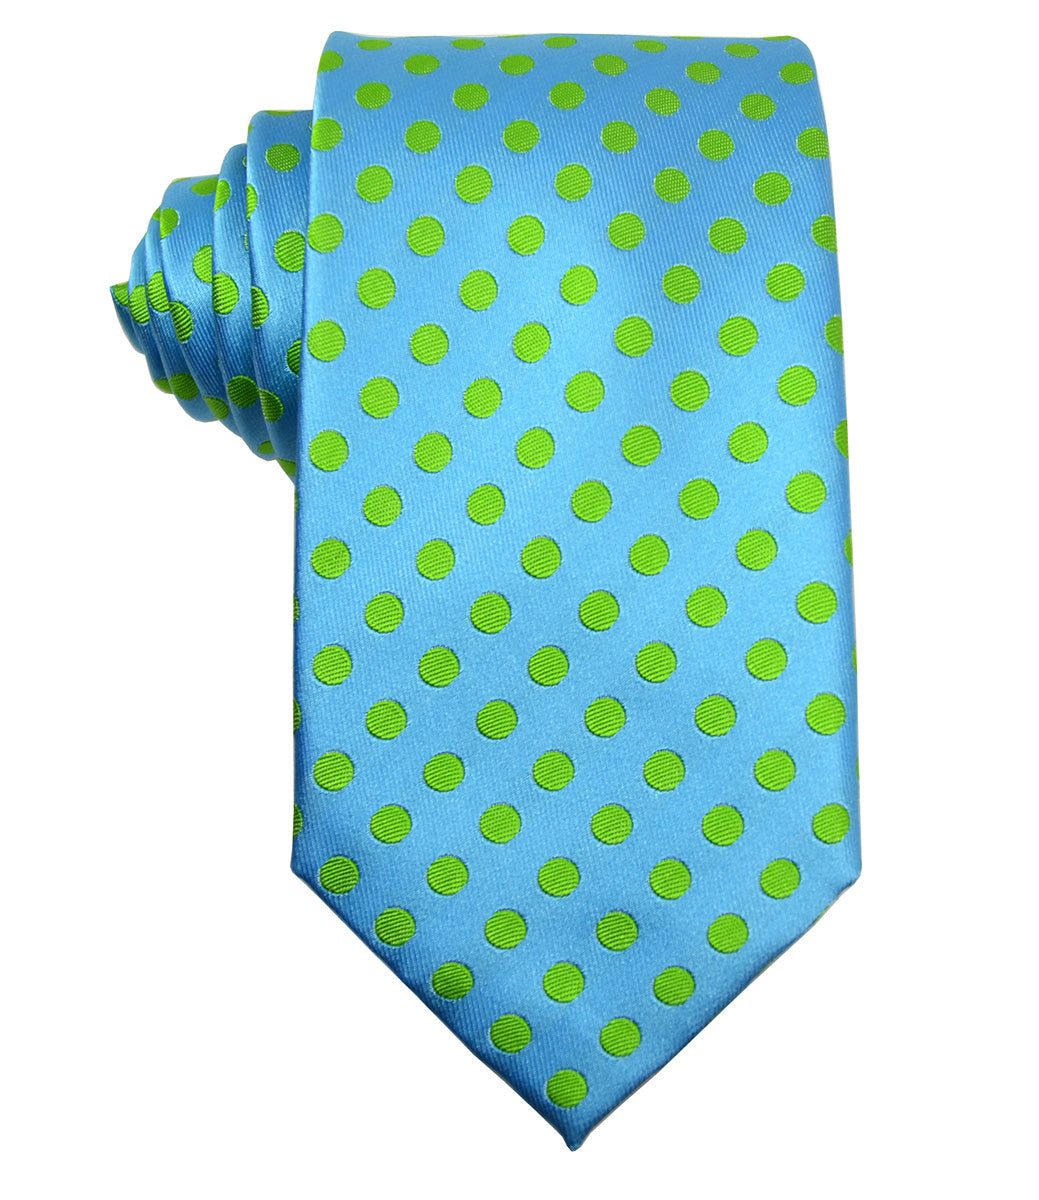 Angel Blue and Green Polka Dot Silk Tie and Pocket Square | Paul Malone